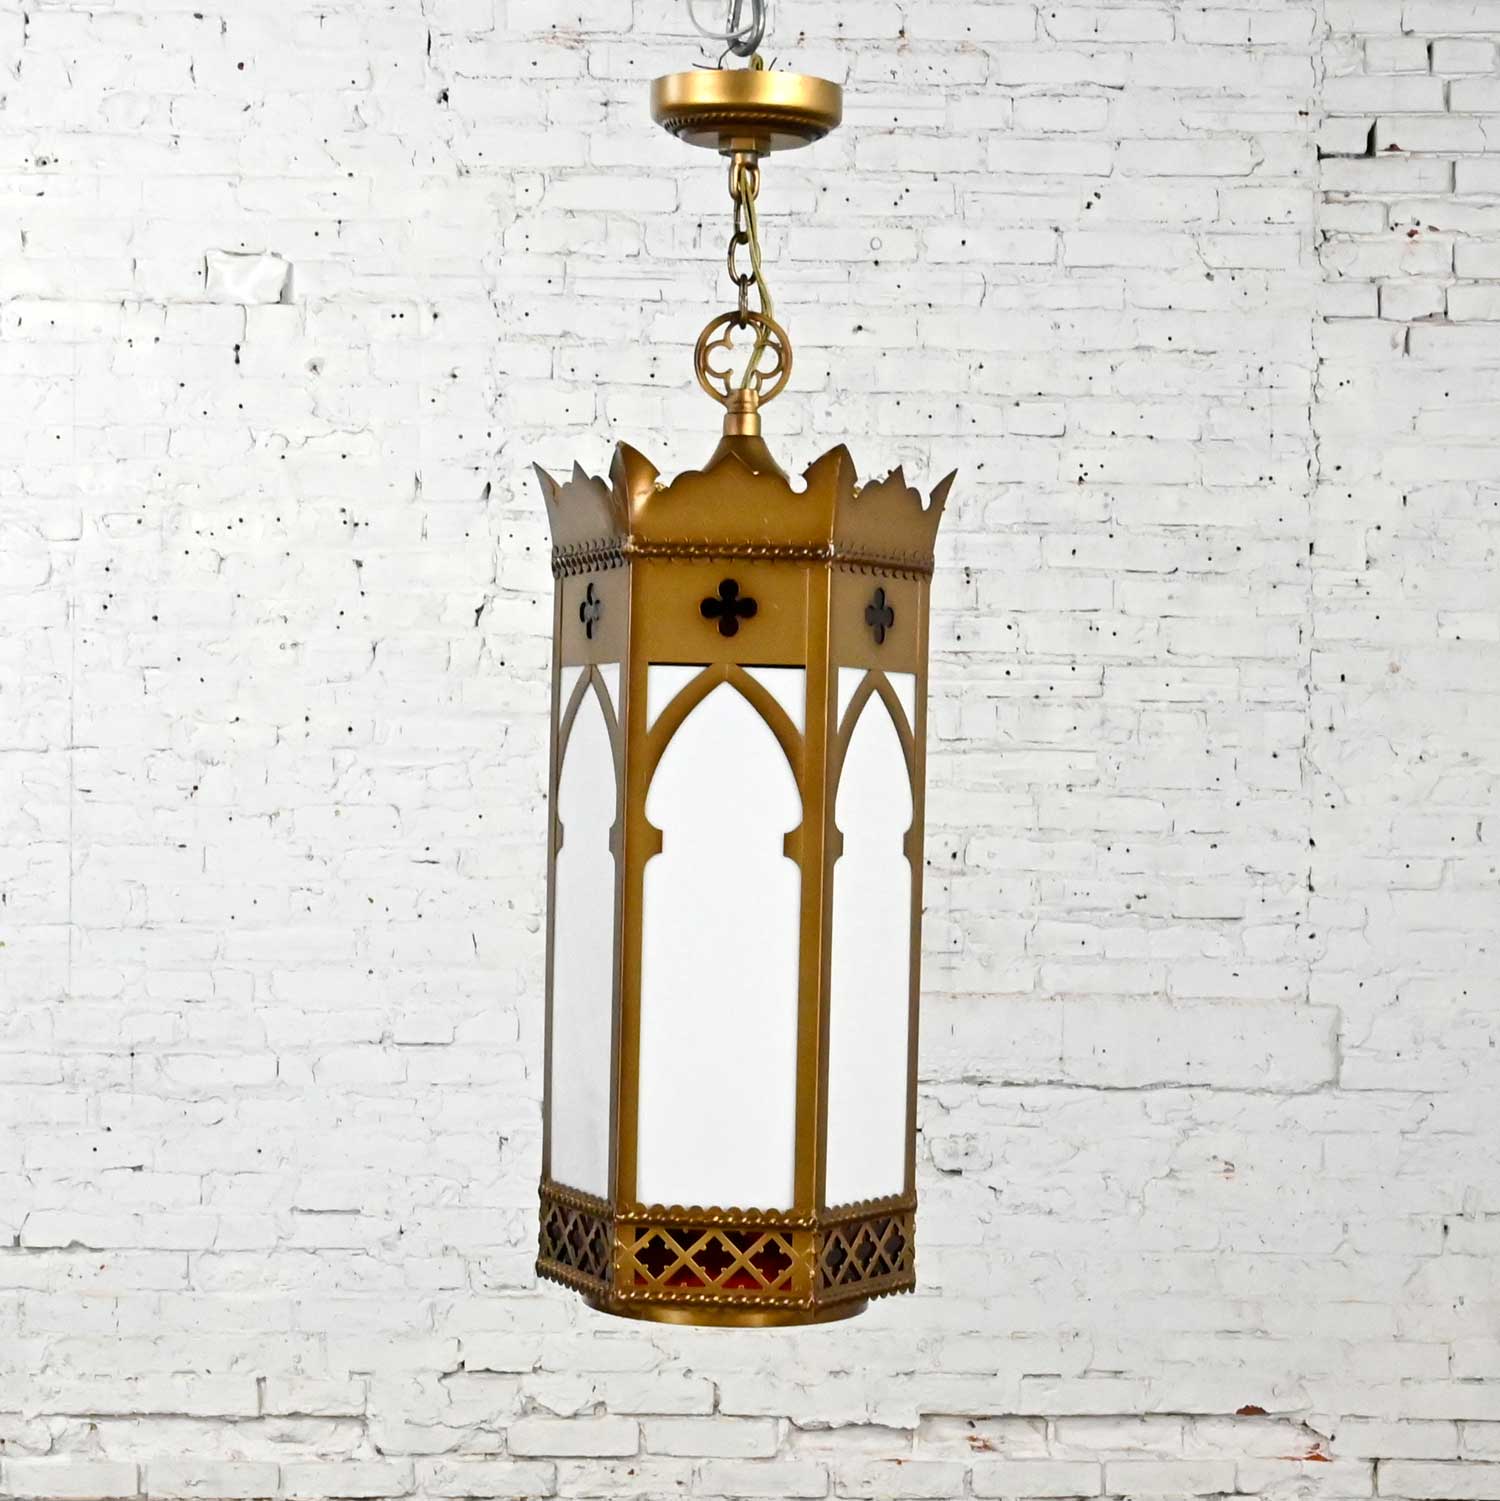 7 Vintage Gothic Ecclesiastical Gold Painted Metal & White Hanging Light Fixtures Selling Separately